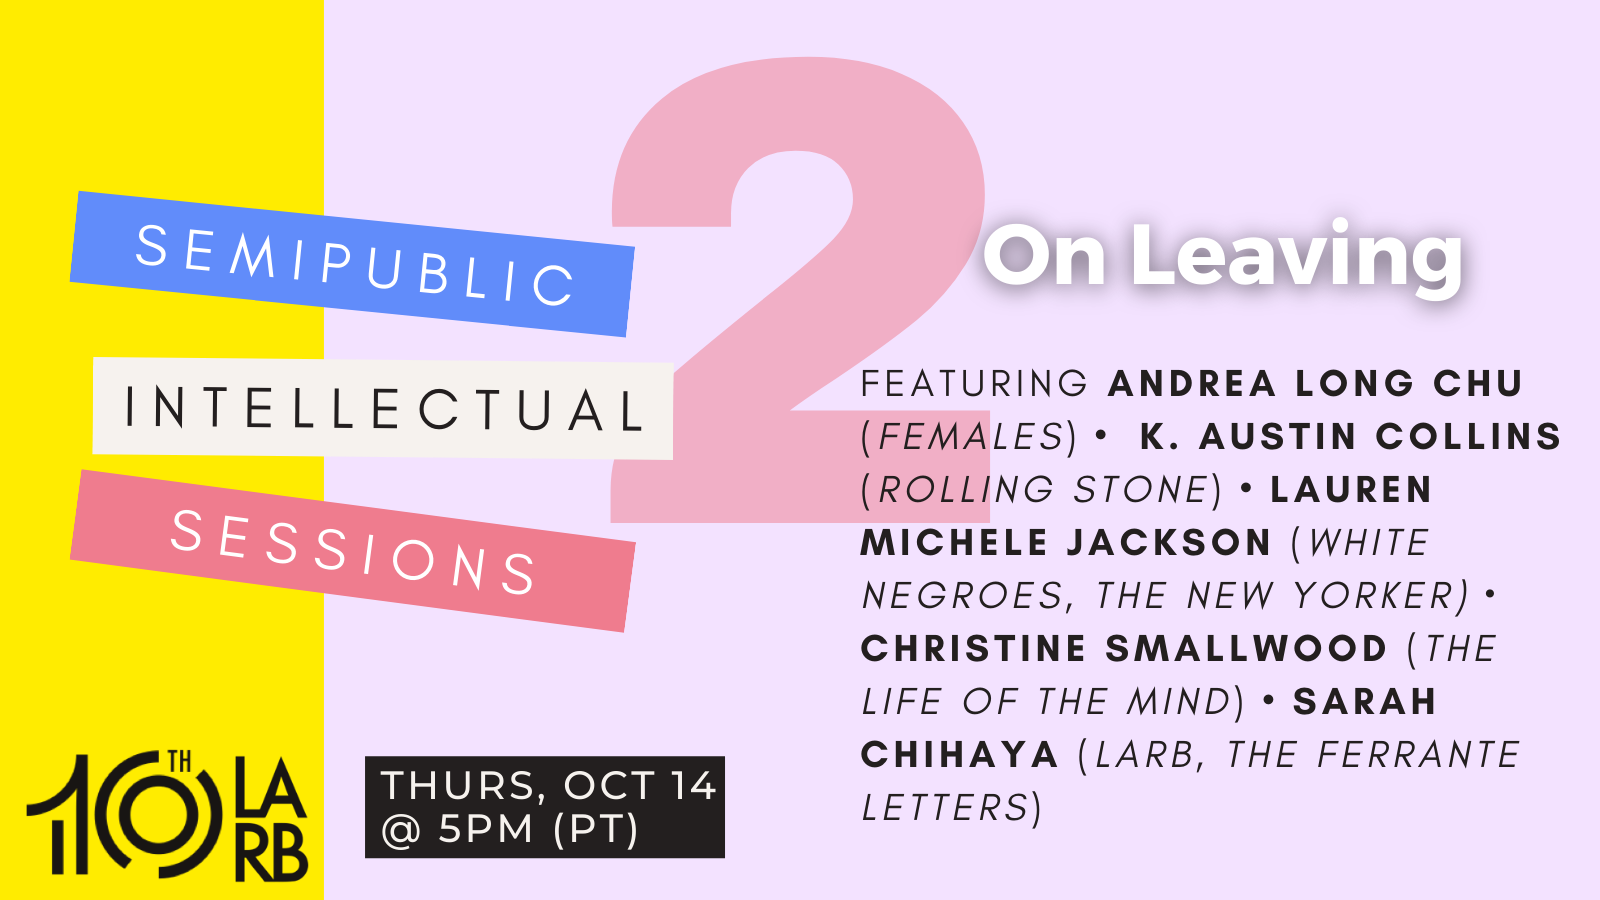 Semipublic Intellectual Sessions: “On Leaving”